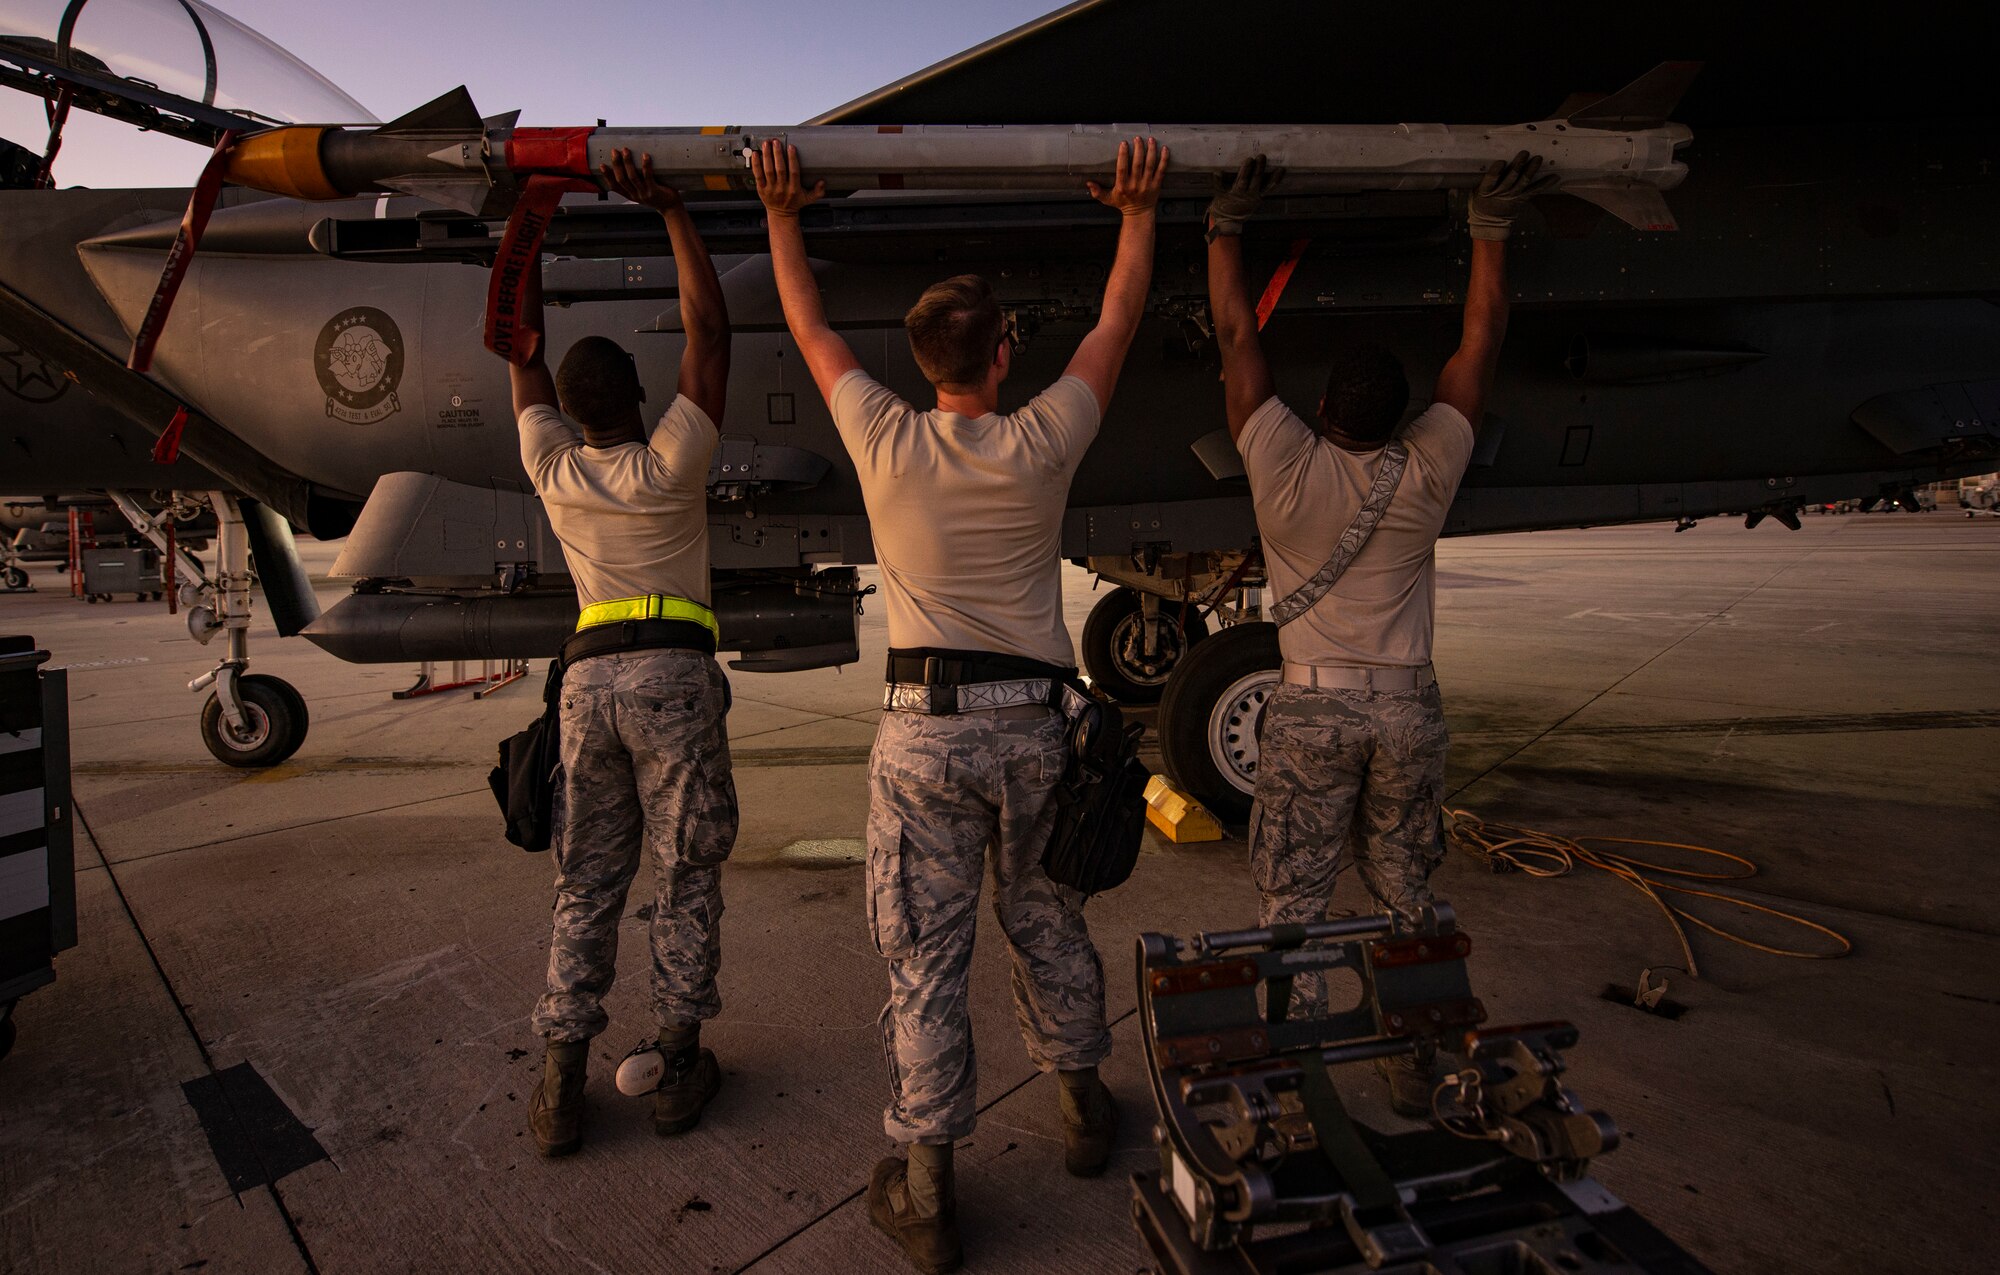 Three aircraft armament systems technicians assigned to the 757th Aircraft Maintenance Squadron load an AIM-9X Sidewinder missile onto an F-15E Strike Eagle fighter jet during Combat Archer 19-12 on Tyndall Air Force Base, Fla., Sept. 24, 2019. The AIM-9X system includes infrared-tracking, air-to-air and air-to-surface capabilities. (U.S. Air Force photo by Airman 1st Class Bailee A. Darbasie)